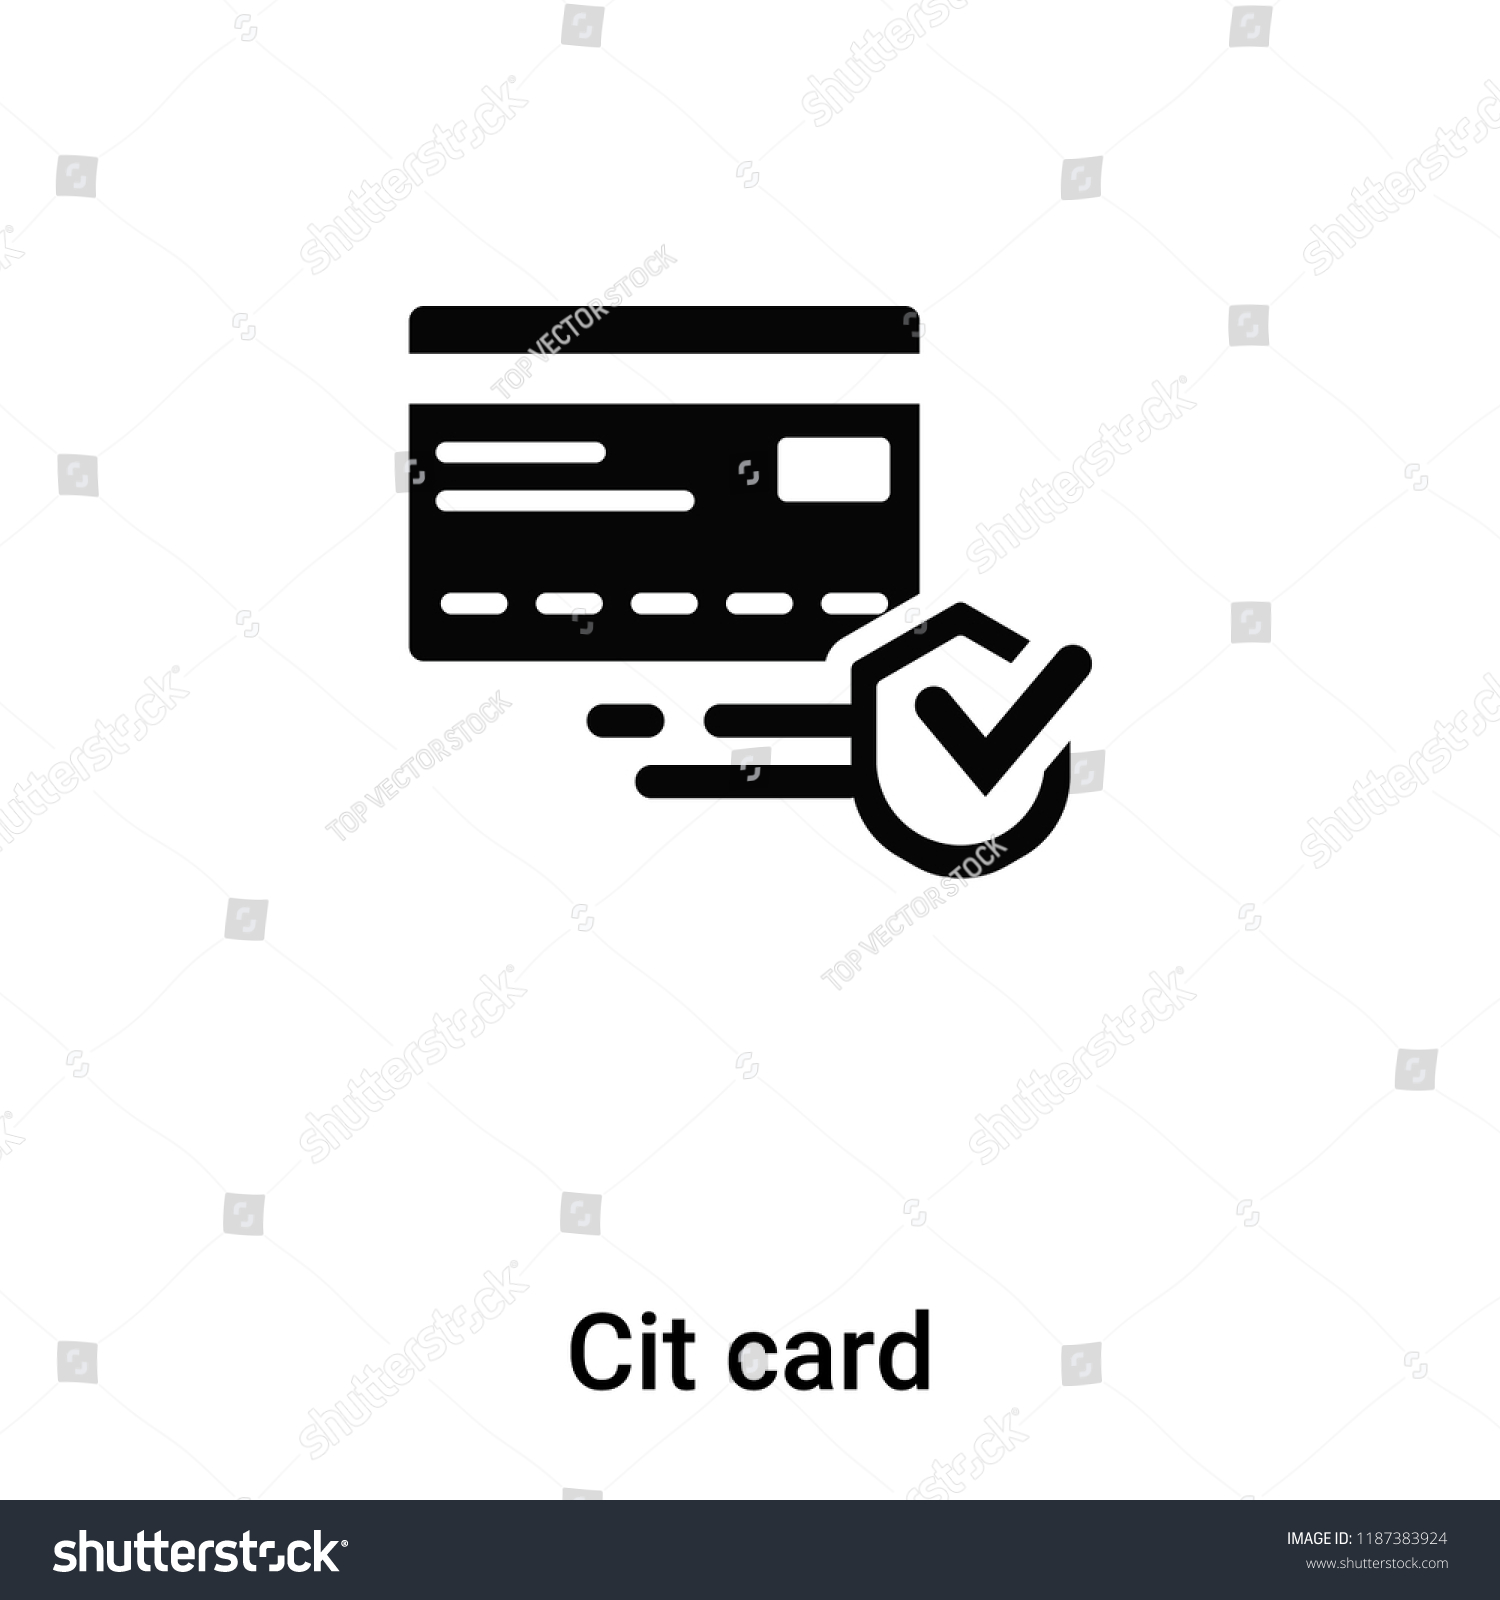 SVG of Credit card icon vector isolated on white background, logo concept of Credit card sign on transparent background, filled black symbol svg